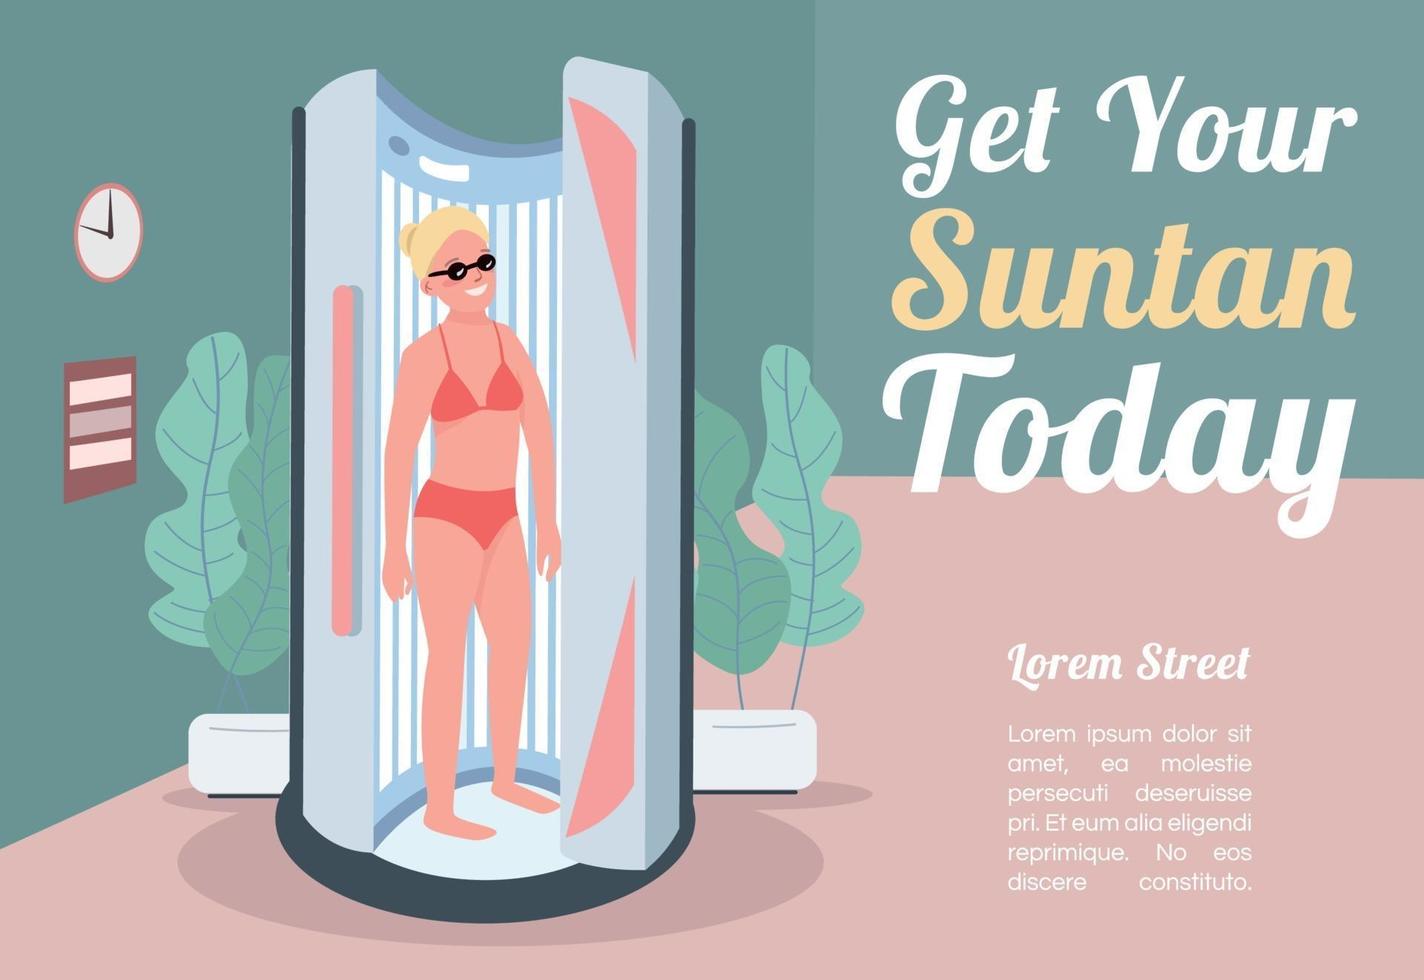 Get your suntan today banner flat vector template. Brochure, poster concept design with cartoon characters. Woman tanning in sunbed. Artificial sunbath horizontal flyer, leaflet with place for text